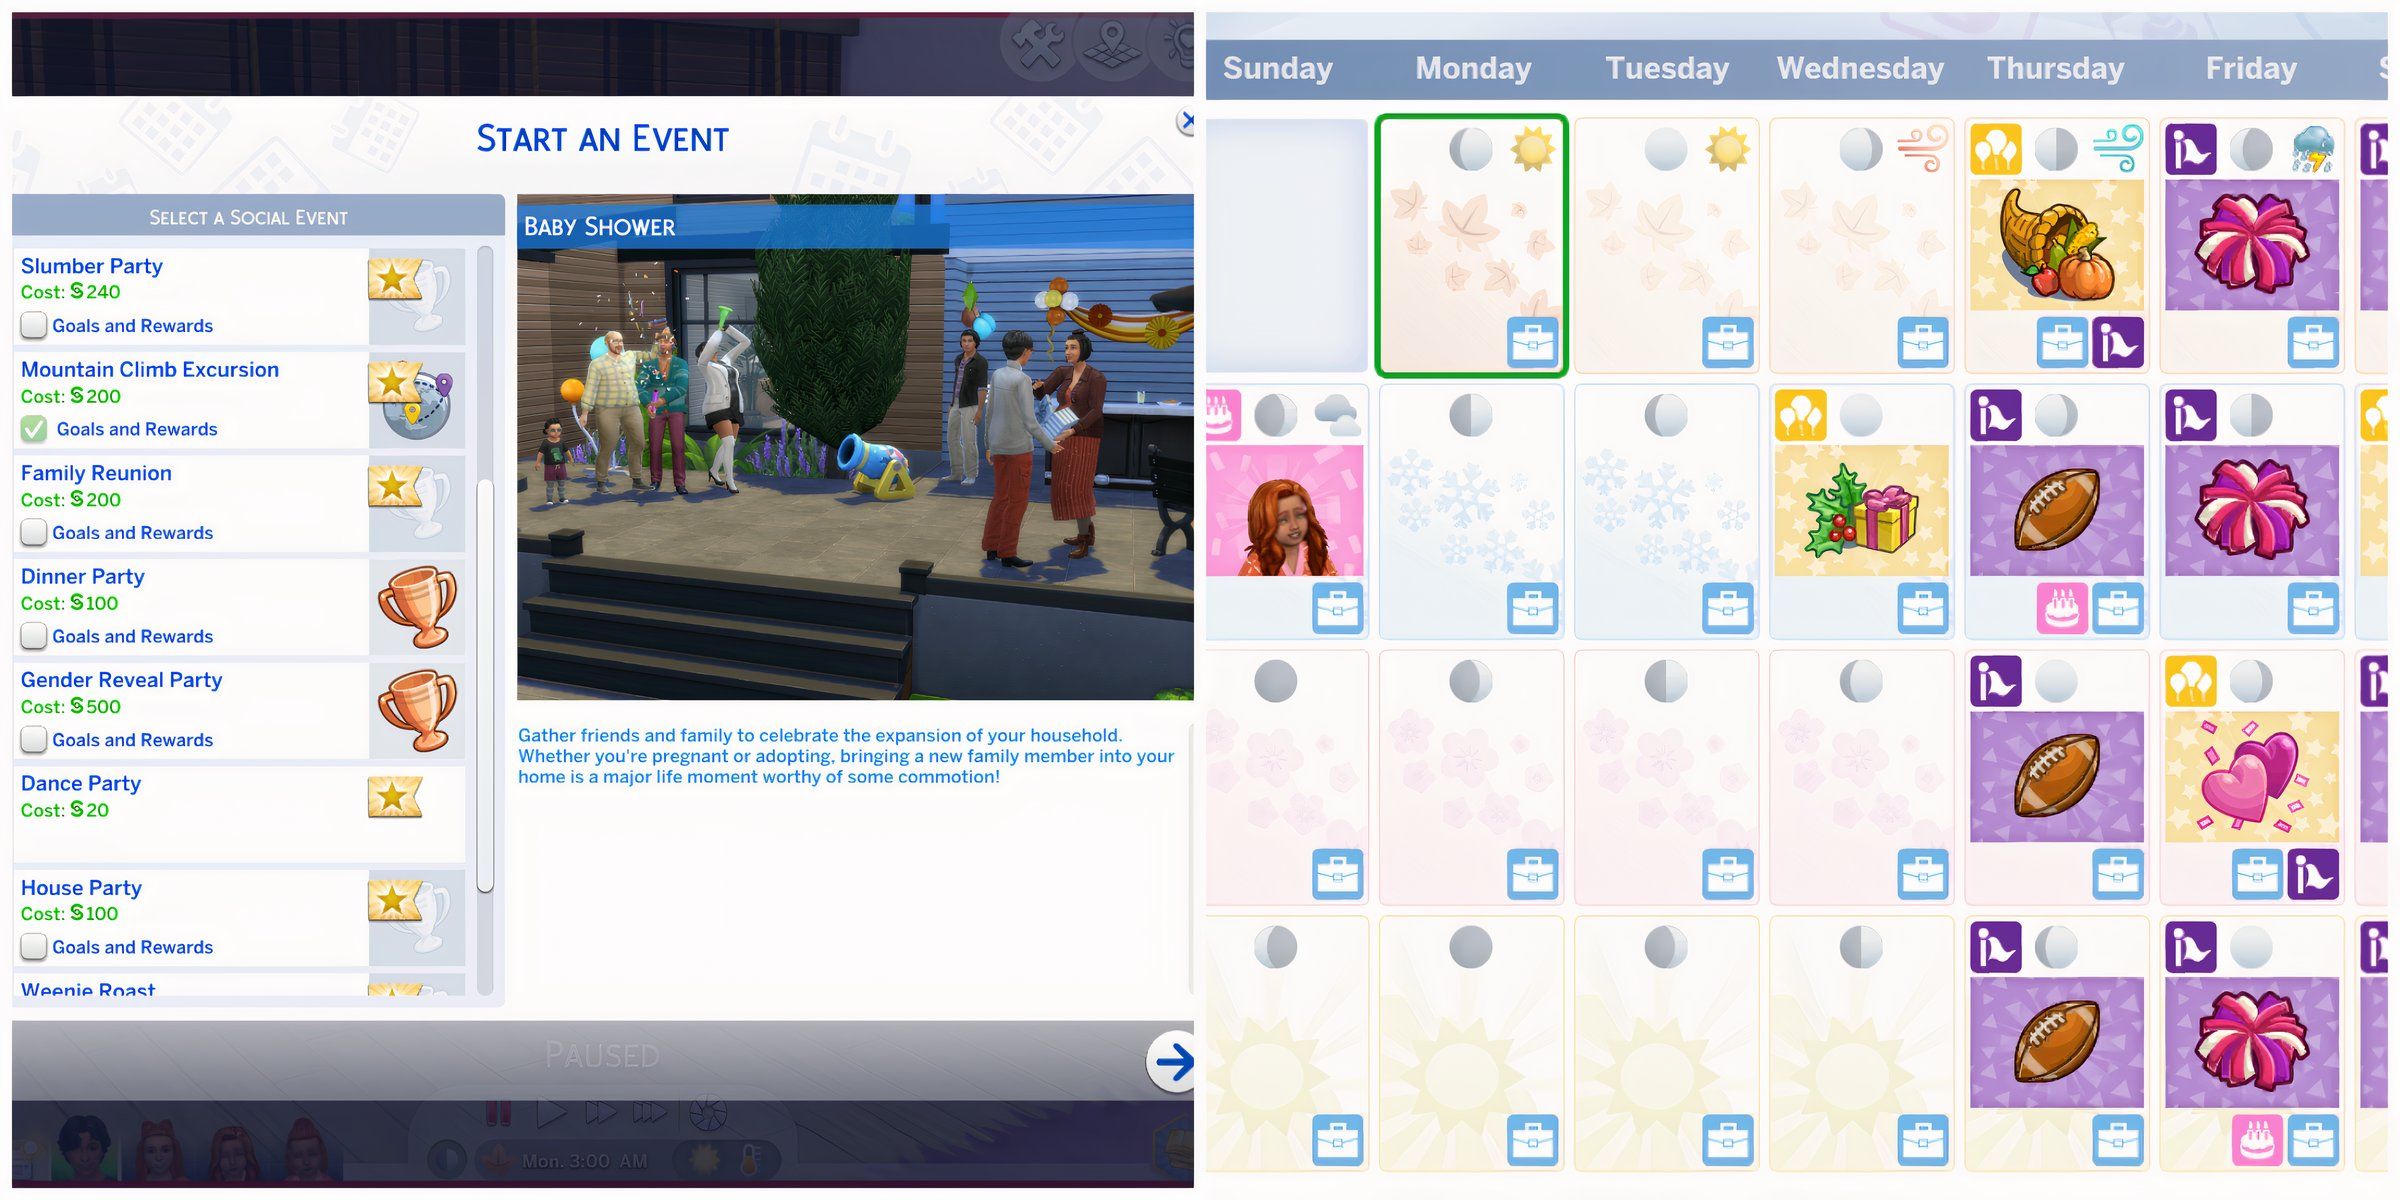 Two ways players can plan parties in the base game and assign other Sims as host with the Come Celebrate mod